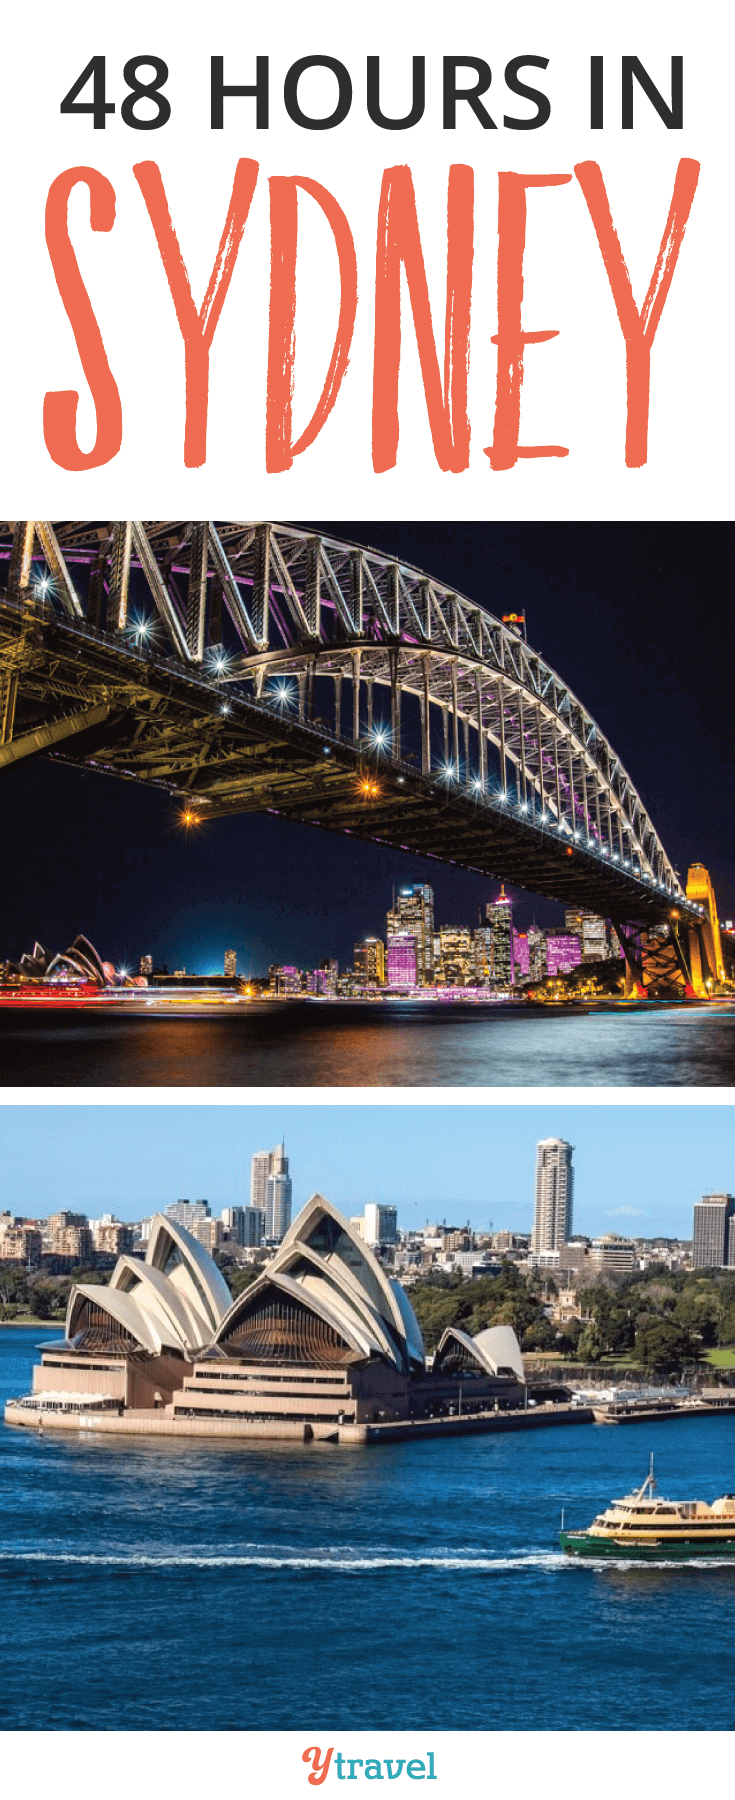 Are you on the hunt for what to do in Sydney if you've only got 48 hours? We've rounded up a great list of things to do in Sydney to make the most of your short trip!